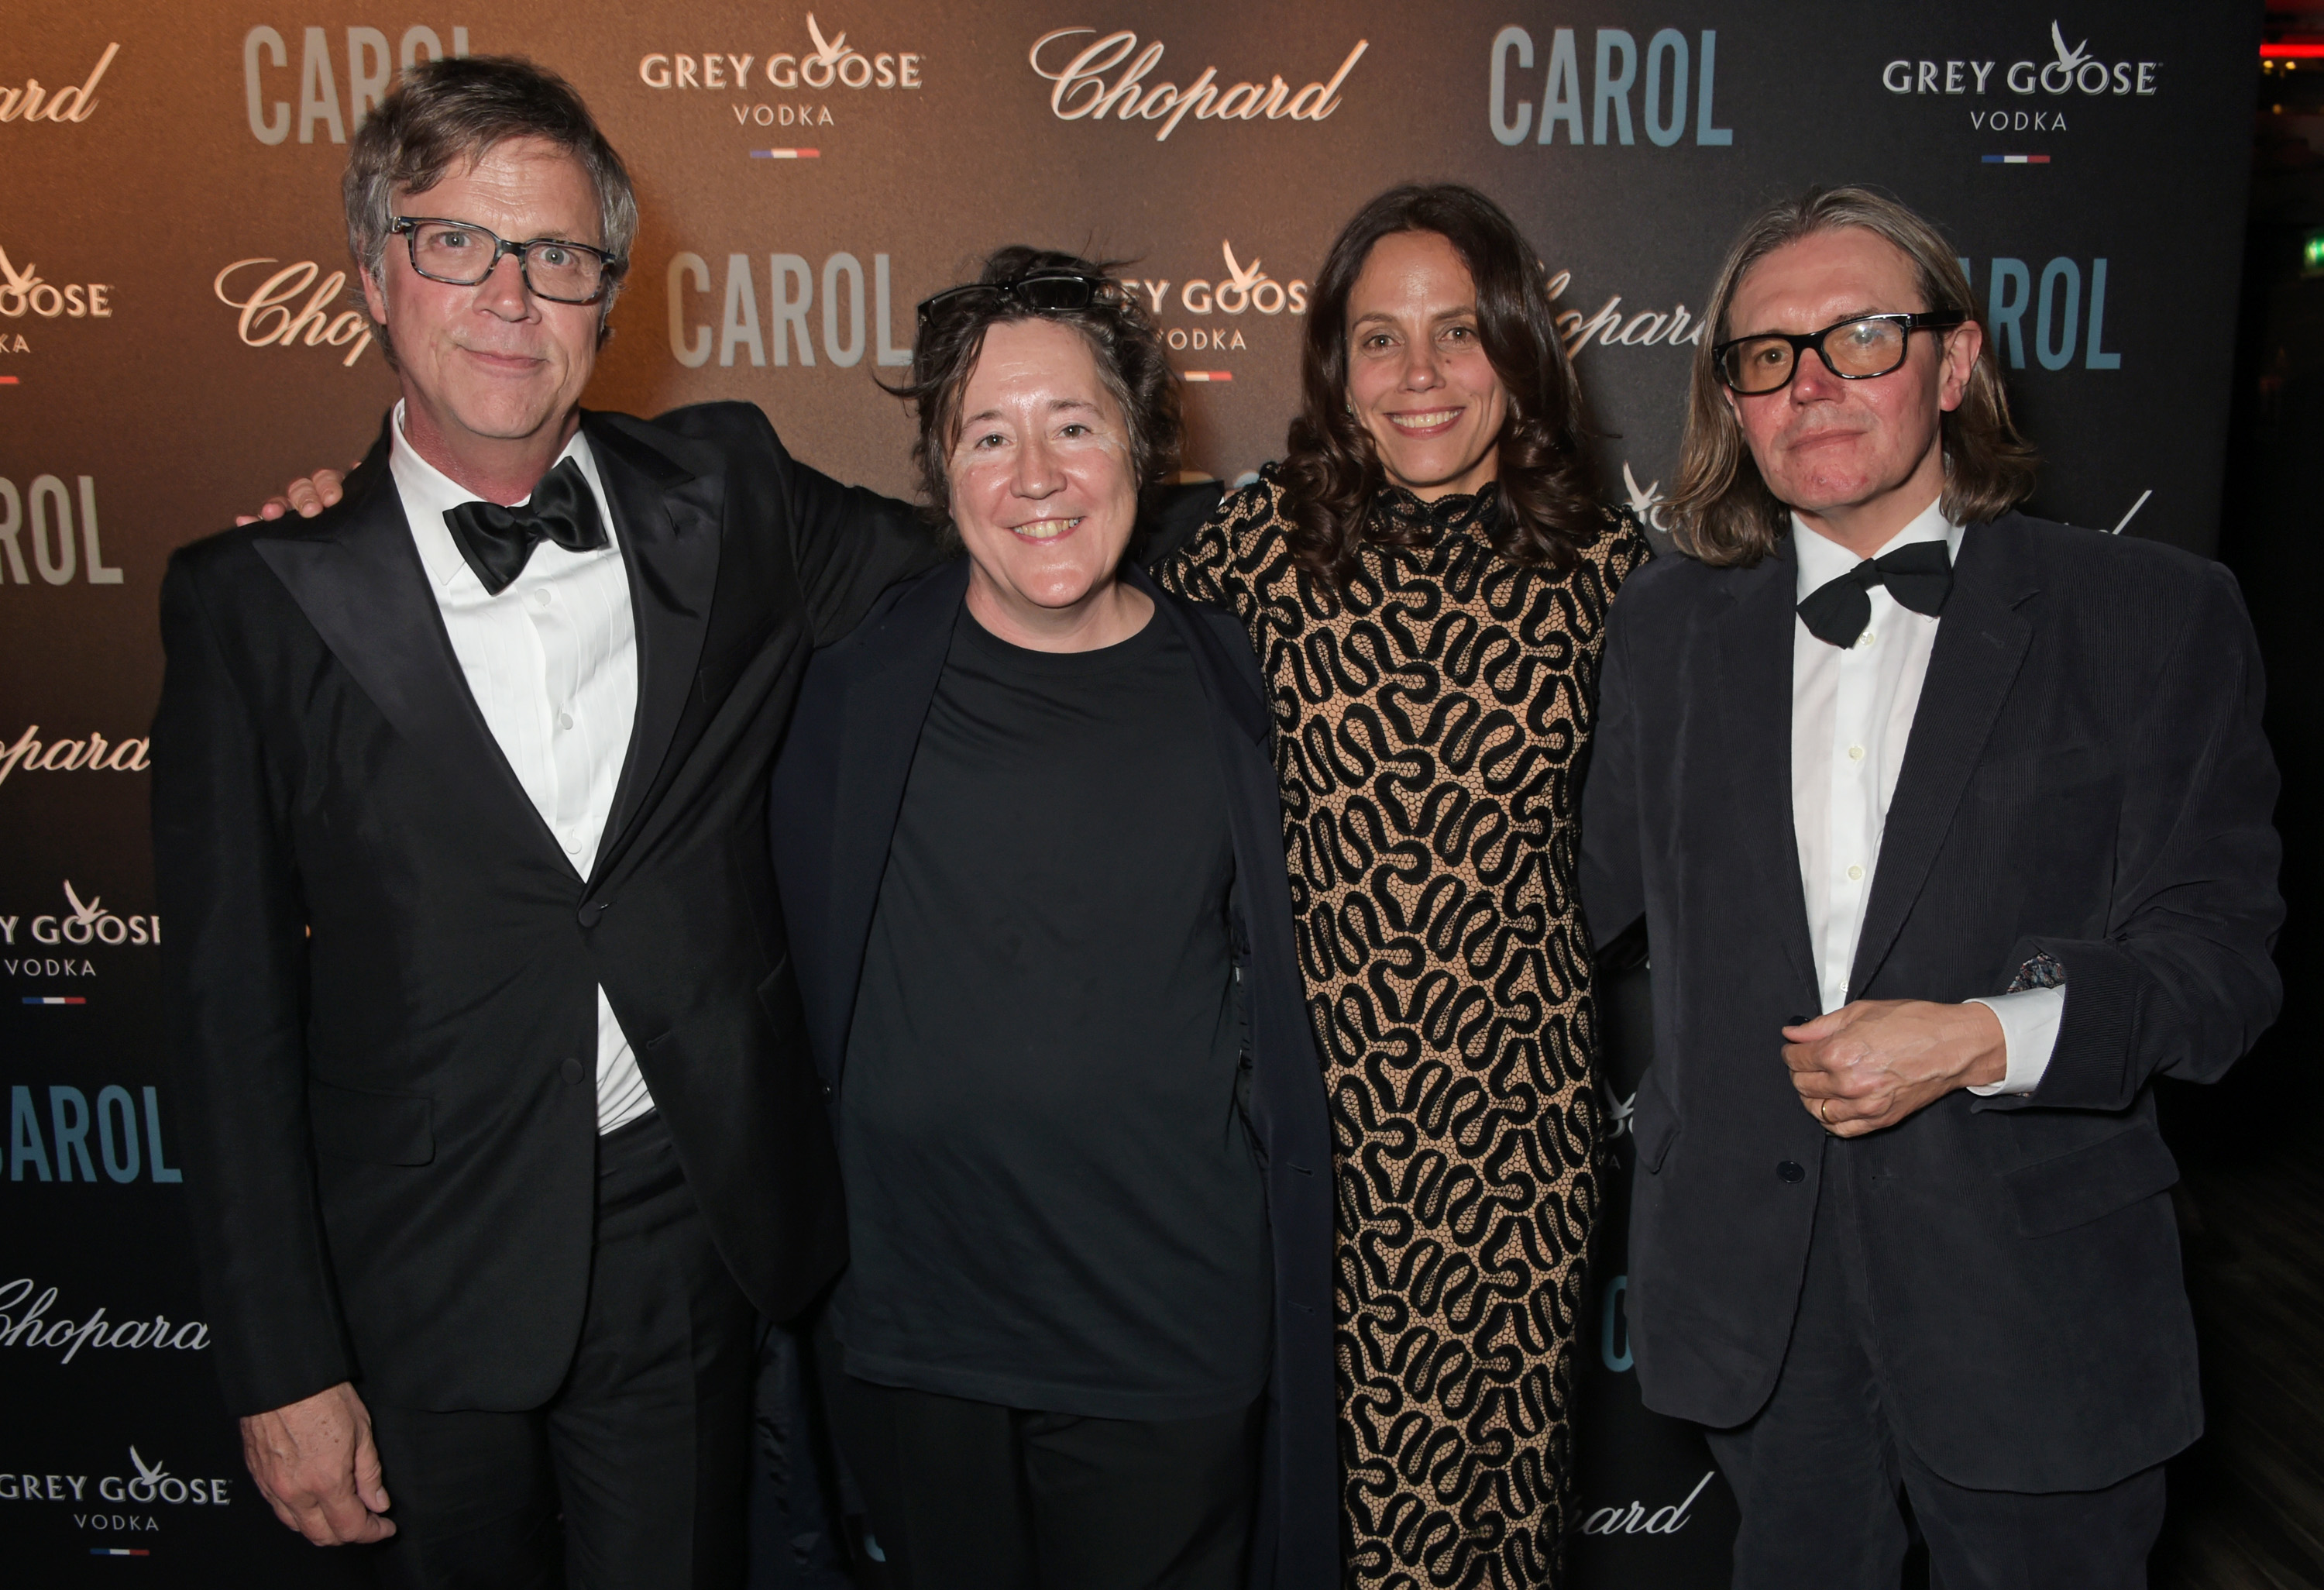 CANNES, FRANCE - MAY 17:  (L-R) Director Todd Haynes, and producers Christine Vachon, Elizabeth Karlsen and Stephen Wooley attend the "Carol" party hosted by Chopard and Grey Goose at Baoli Beach, Cannes Film Festival on May 17, 2015 in Cannes, France.   Pic Credit: Dave Benett